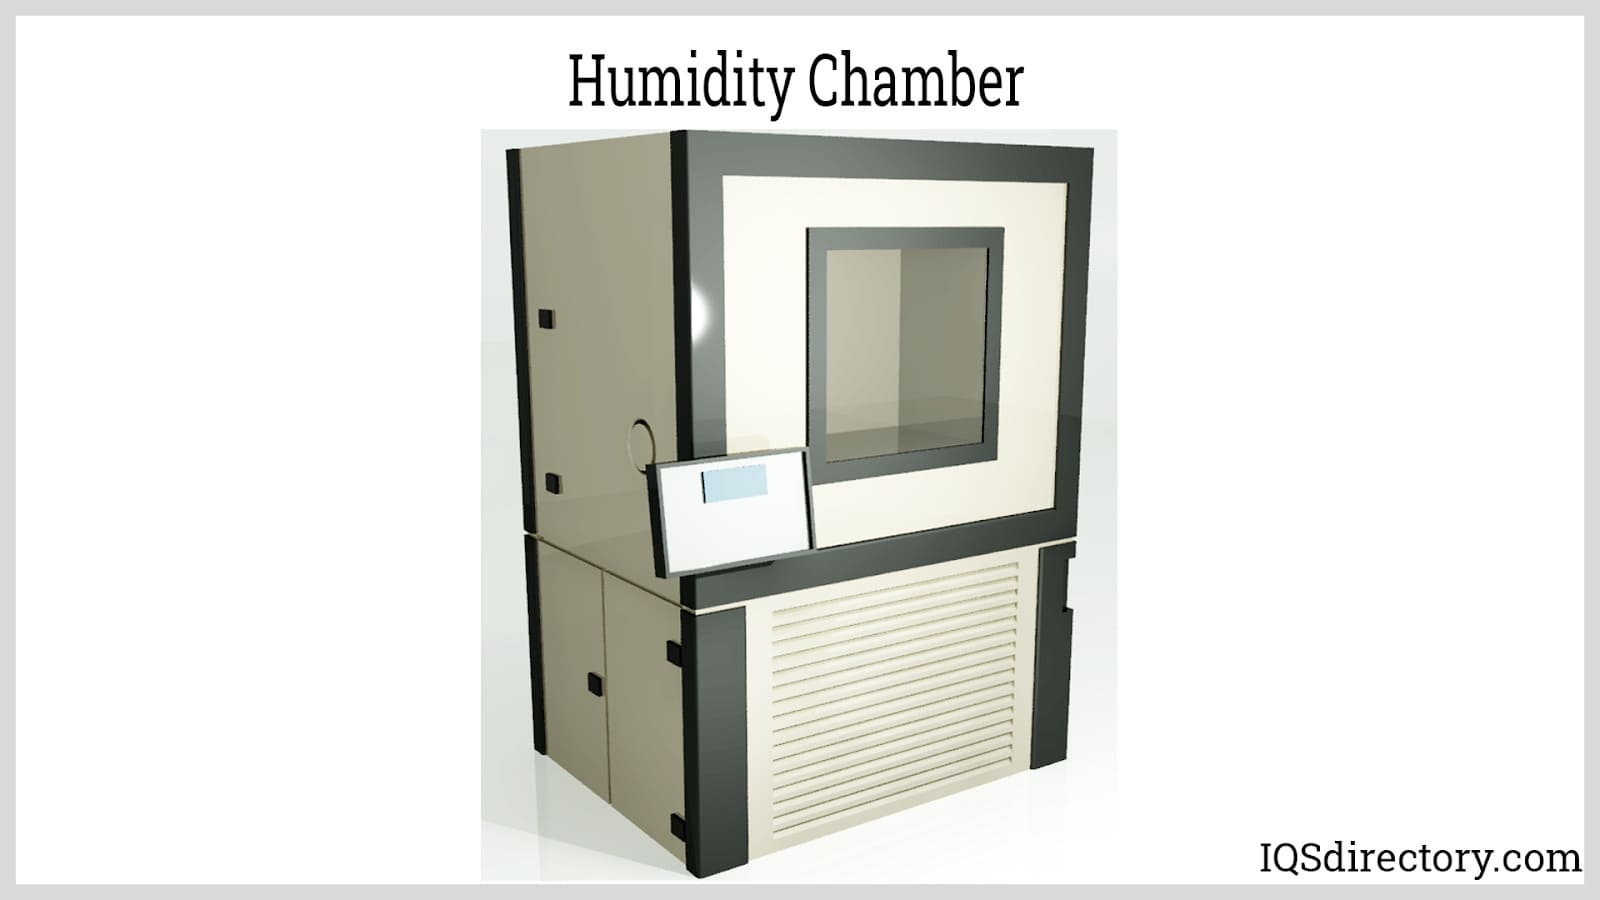 Illustration of a humidity test chamber